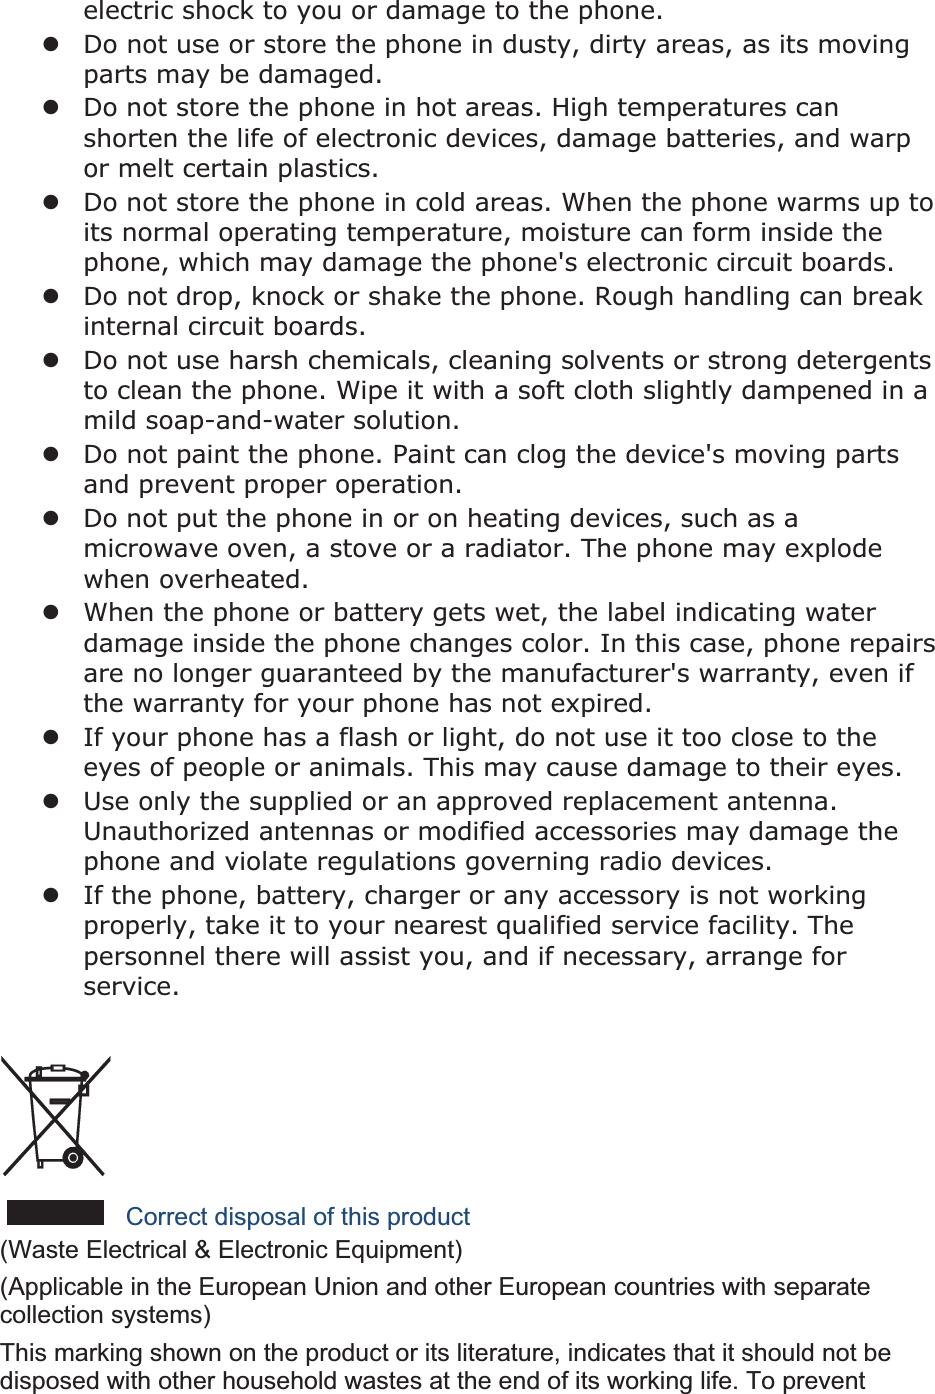 electric shock to you or damage to the phone.zDo not use or store the phone in dusty, dirty areas, as its moving parts may be damaged.zDo not store the phone in hot areas. High temperatures can shorten the life of electronic devices, damage batteries, and warp or melt certain plastics.zDo not store the phone in cold areas. When the phone warms up to its normal operating temperature, moisture can form inside the phone, which may damage the phone&apos;s electronic circuit boards.zDo not drop, knock or shake the phone. Rough handling can break internal circuit boards.zDo not use harsh chemicals, cleaning solvents or strong detergents to clean the phone. Wipe it with a soft cloth slightly dampened in a mild soap-and-water solution.zDo not paint the phone. Paint can clog the device&apos;s moving parts and prevent proper operation.zDo not put the phone in or on heating devices, such as a microwave oven, a stove or a radiator. The phone may explode when overheated.zWhen the phone or battery gets wet, the label indicating water damage inside the phone changes color. In this case, phone repairs are no longer guaranteed by the manufacturer&apos;s warranty, even if the warranty for your phone has not expired. zIf your phone has a flash or light, do not use it too close to the eyes of people or animals. This may cause damage to their eyes.zUse only the supplied or an approved replacement antenna. Unauthorized antennas or modified accessories may damage the phone and violate regulations governing radio devices.zIf the phone, battery, charger or any accessory is not working properly, take it to your nearest qualified service facility. The personnel there will assist you, and if necessary, arrange for service.Correct disposal of this product(Waste Electrical &amp; Electronic Equipment) (Applicable in the European Union and other European countries with separate collection systems) This marking shown on the product or its literature, indicates that it should not be disposed with other household wastes at the end of its working life. To prevent 